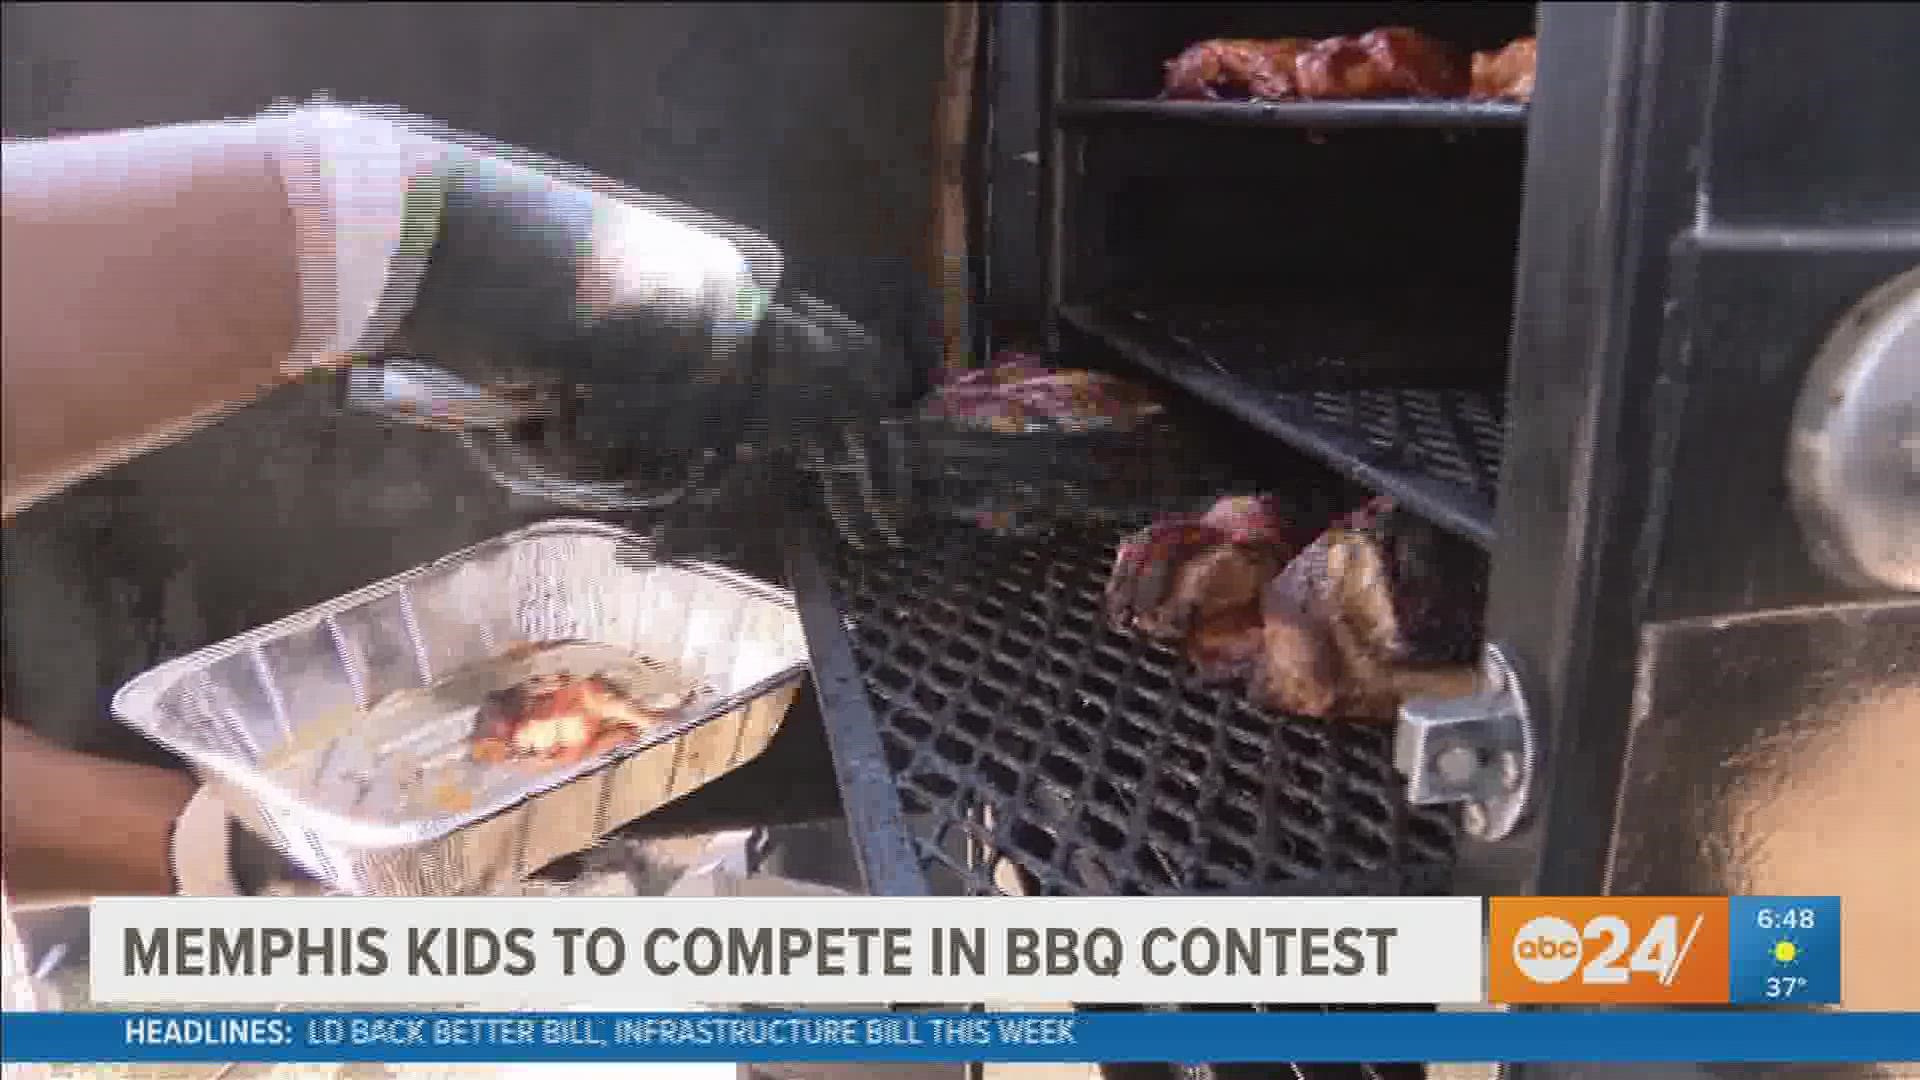 10 teams of kids, ages 14-18, will compete Saturday at AutoZone Park in a BBQ cooking championship